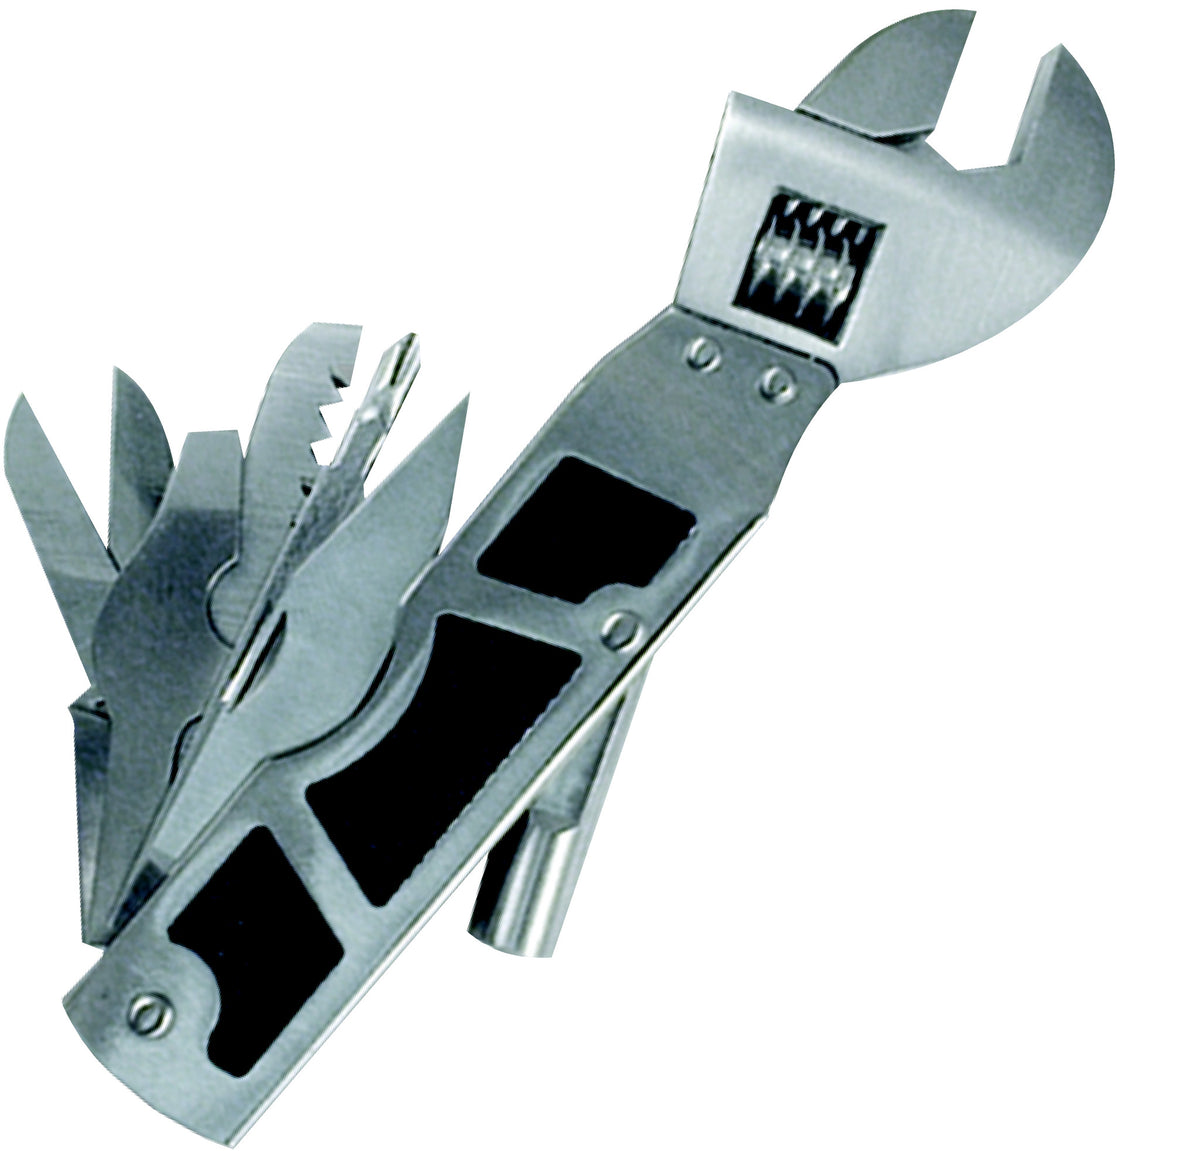 8 in 1 Drummer's Wrench Multi-Tool — AMERICAN RECORDER TECHNOLOGIES, INC.